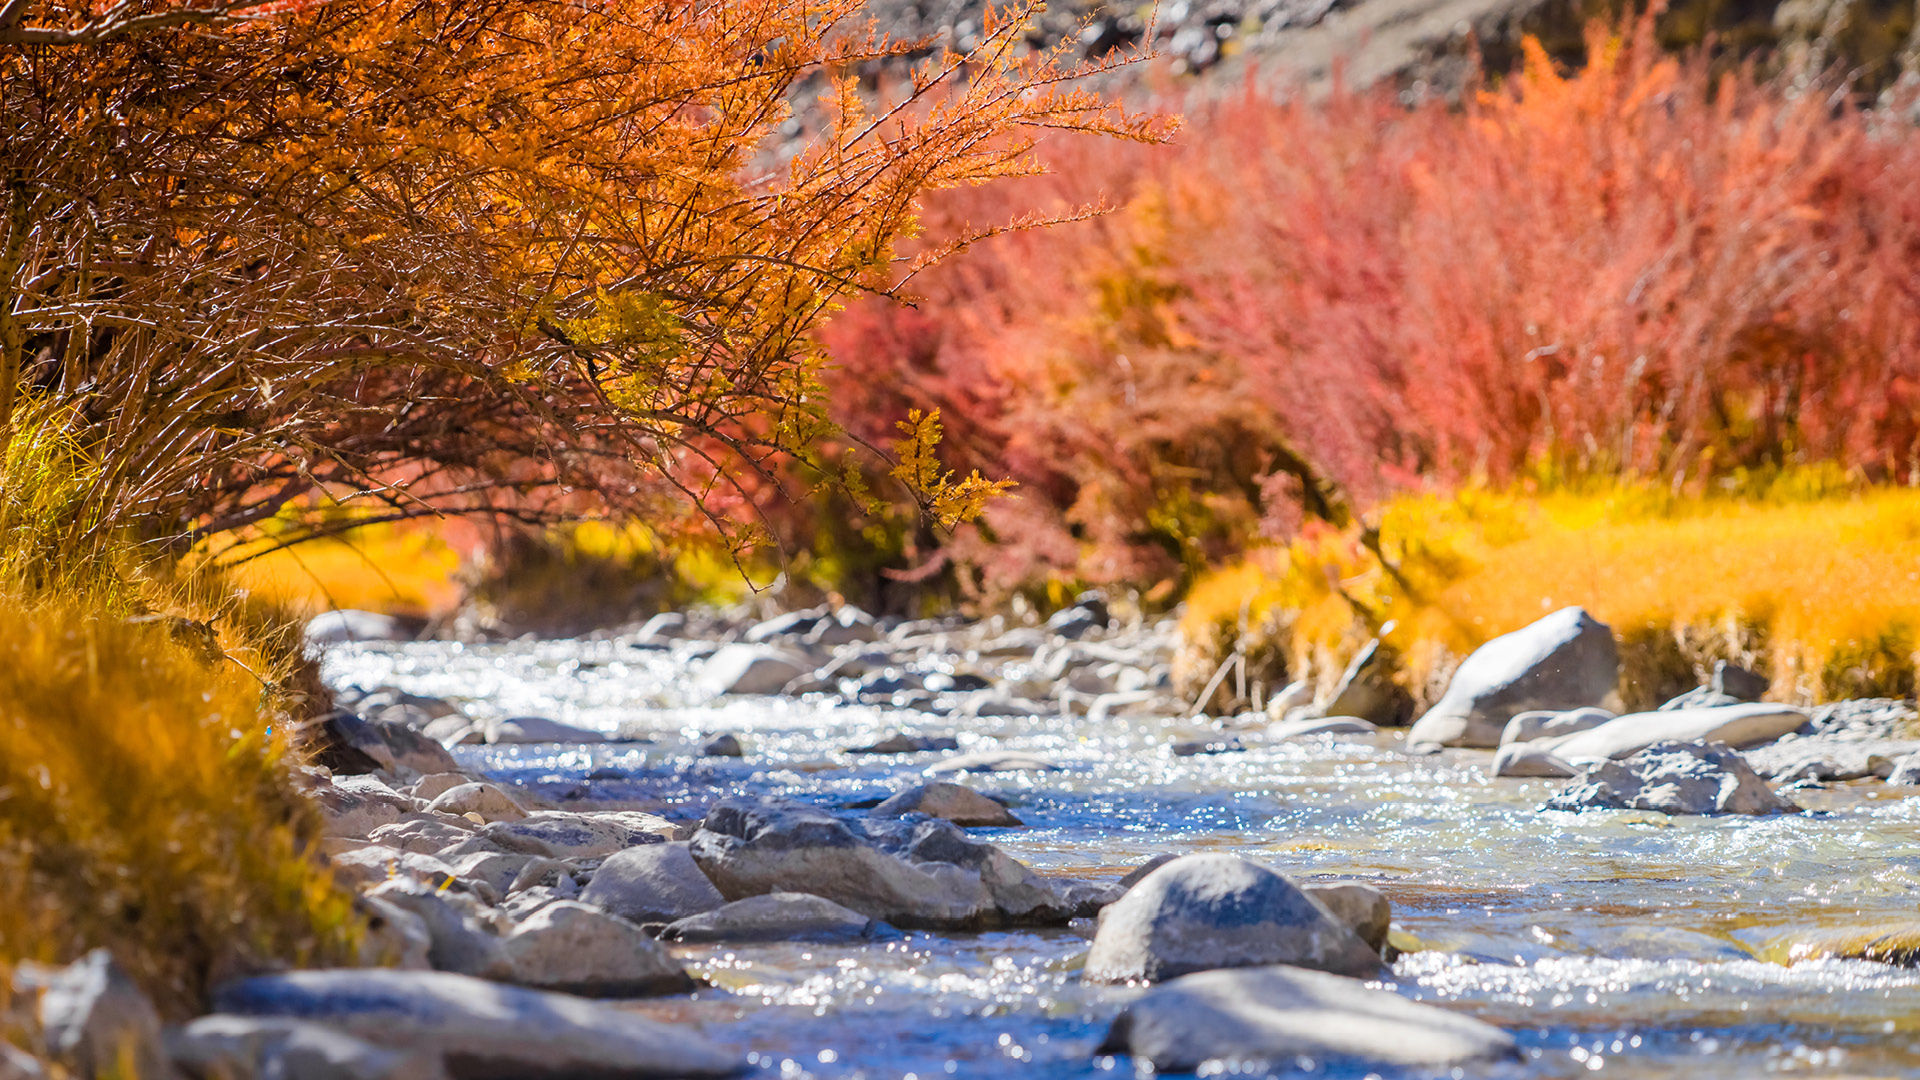 Where To Witness The Most Spectacular Fall Foliage In India?